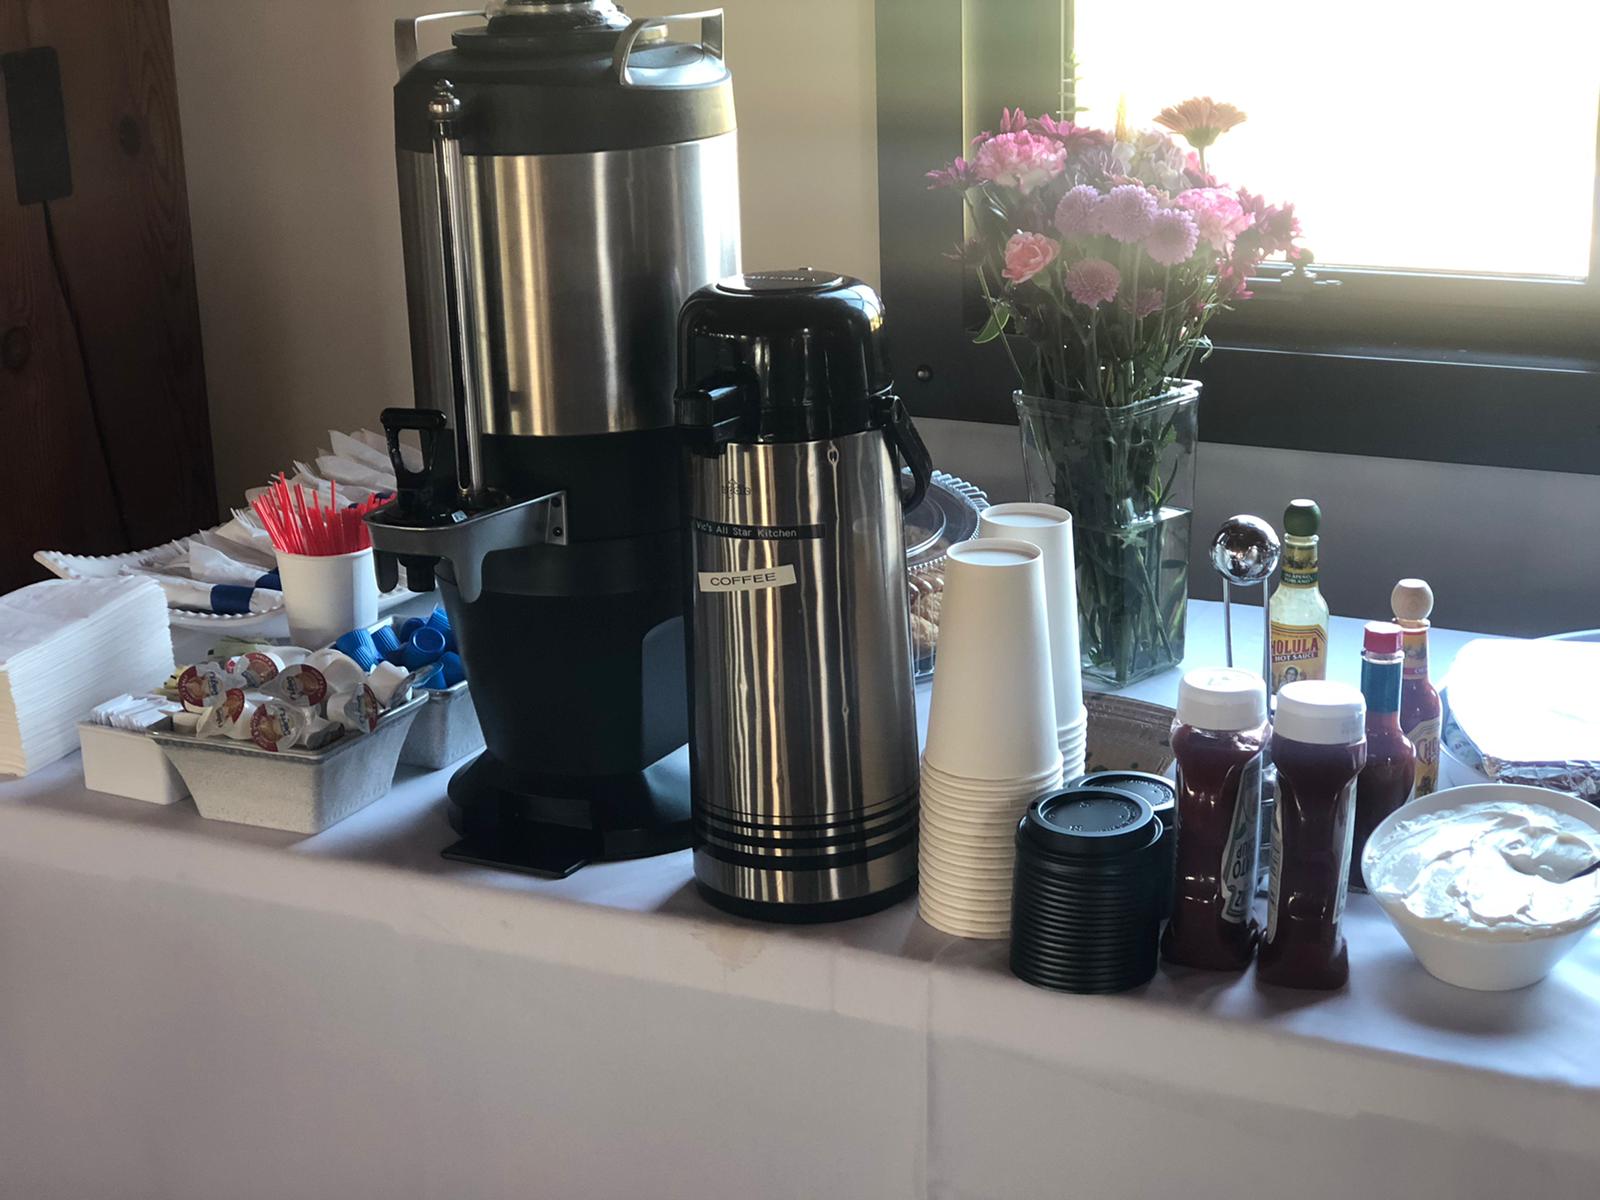 coffee catering